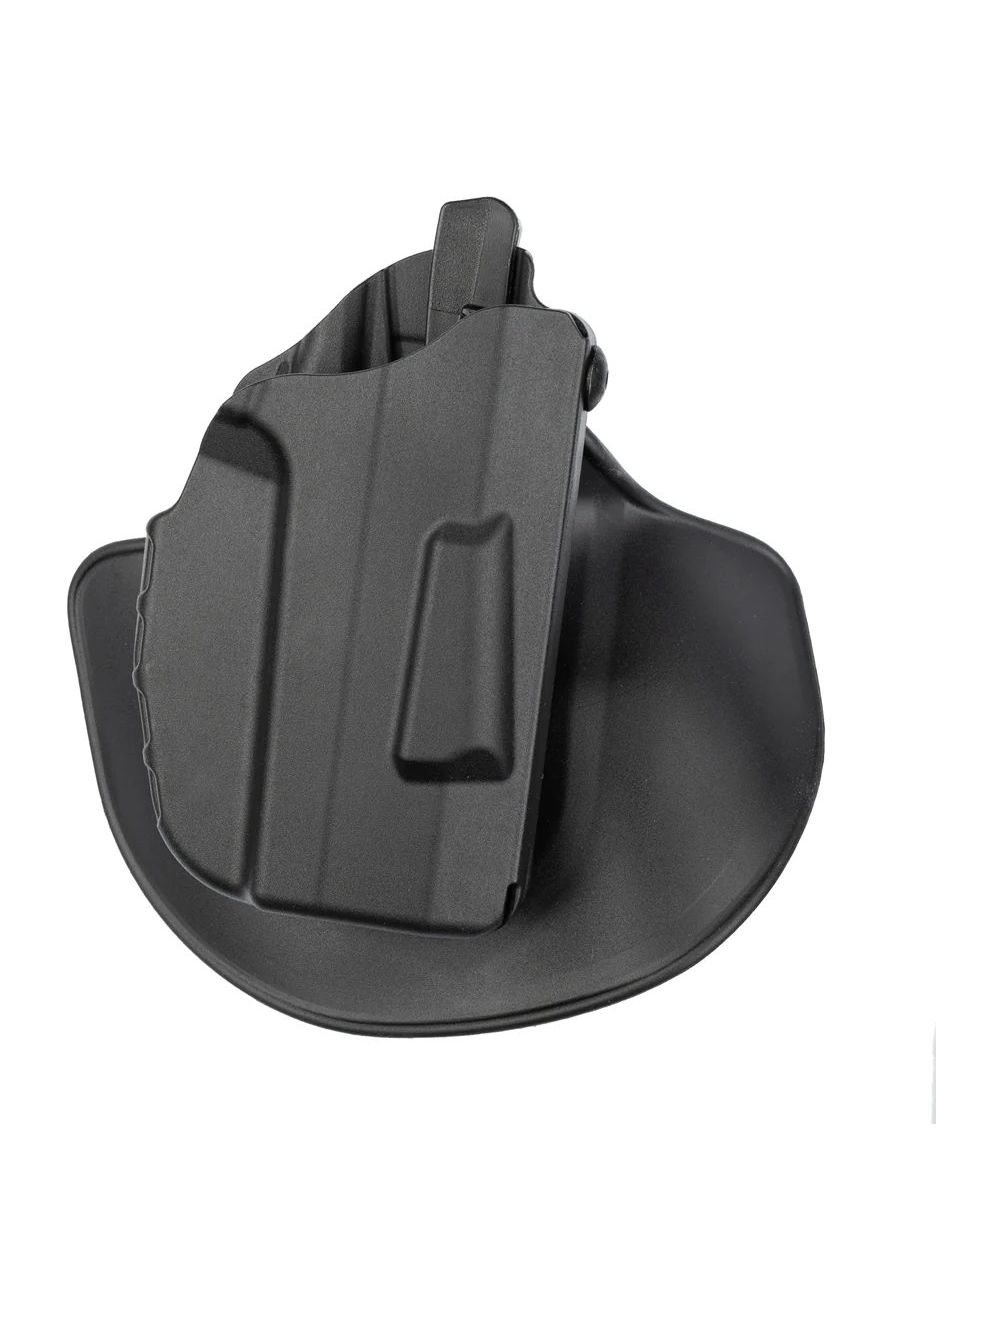 Model 7378 7TS ALS Concealment Paddle and Belt Loop Combo Holster for Glock 48